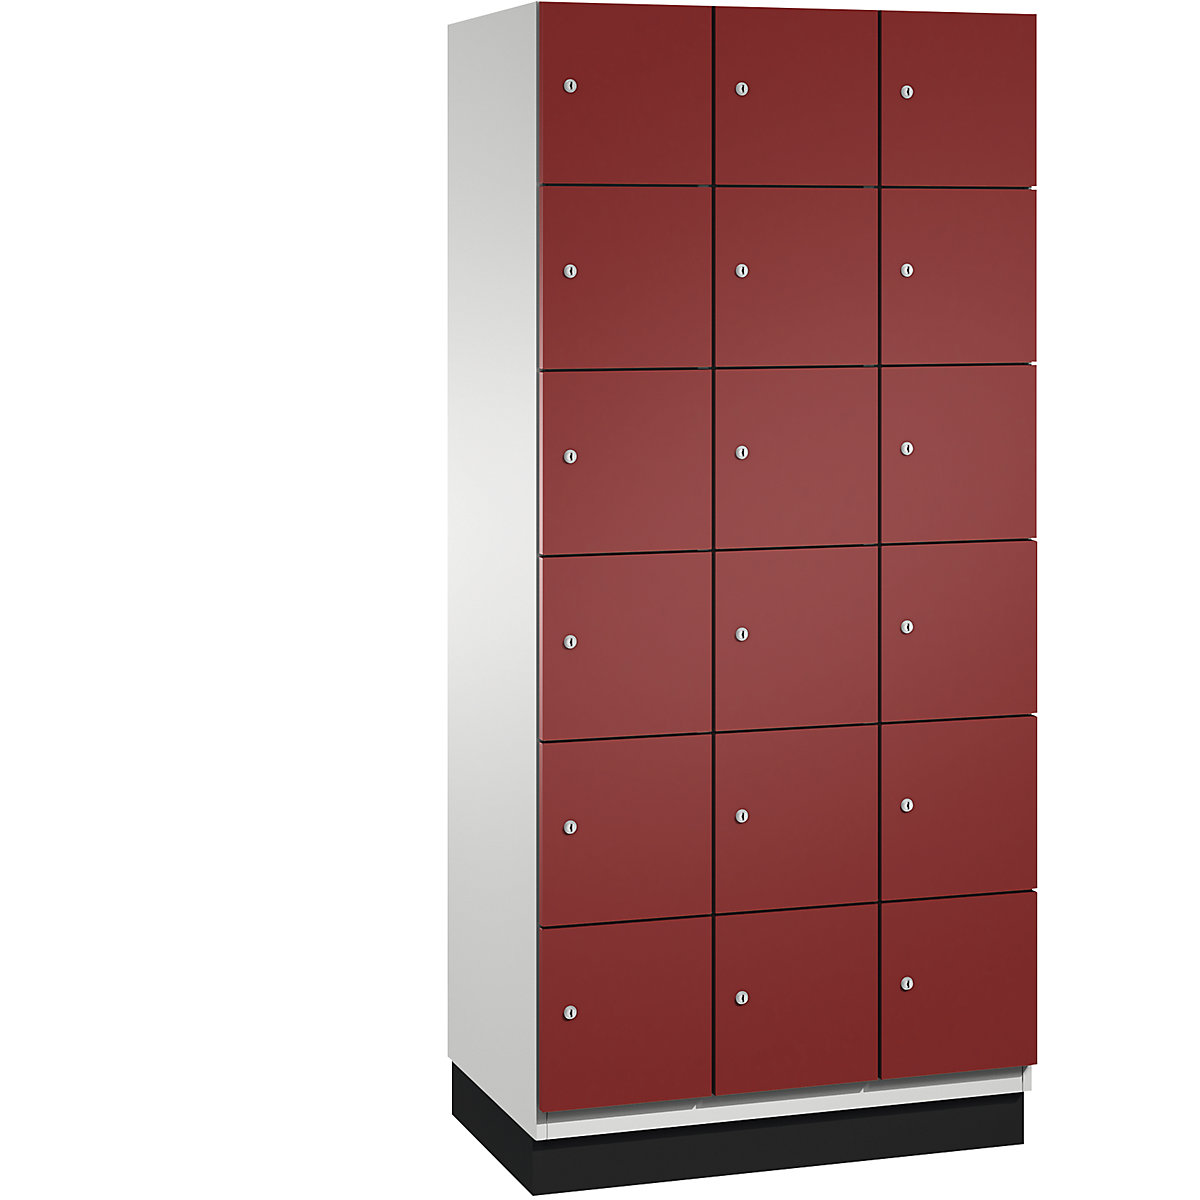 C+P – CAMBIO compartment locker with sheet steel doors, 18 compartments, width 900 mm, body light grey / door ruby red